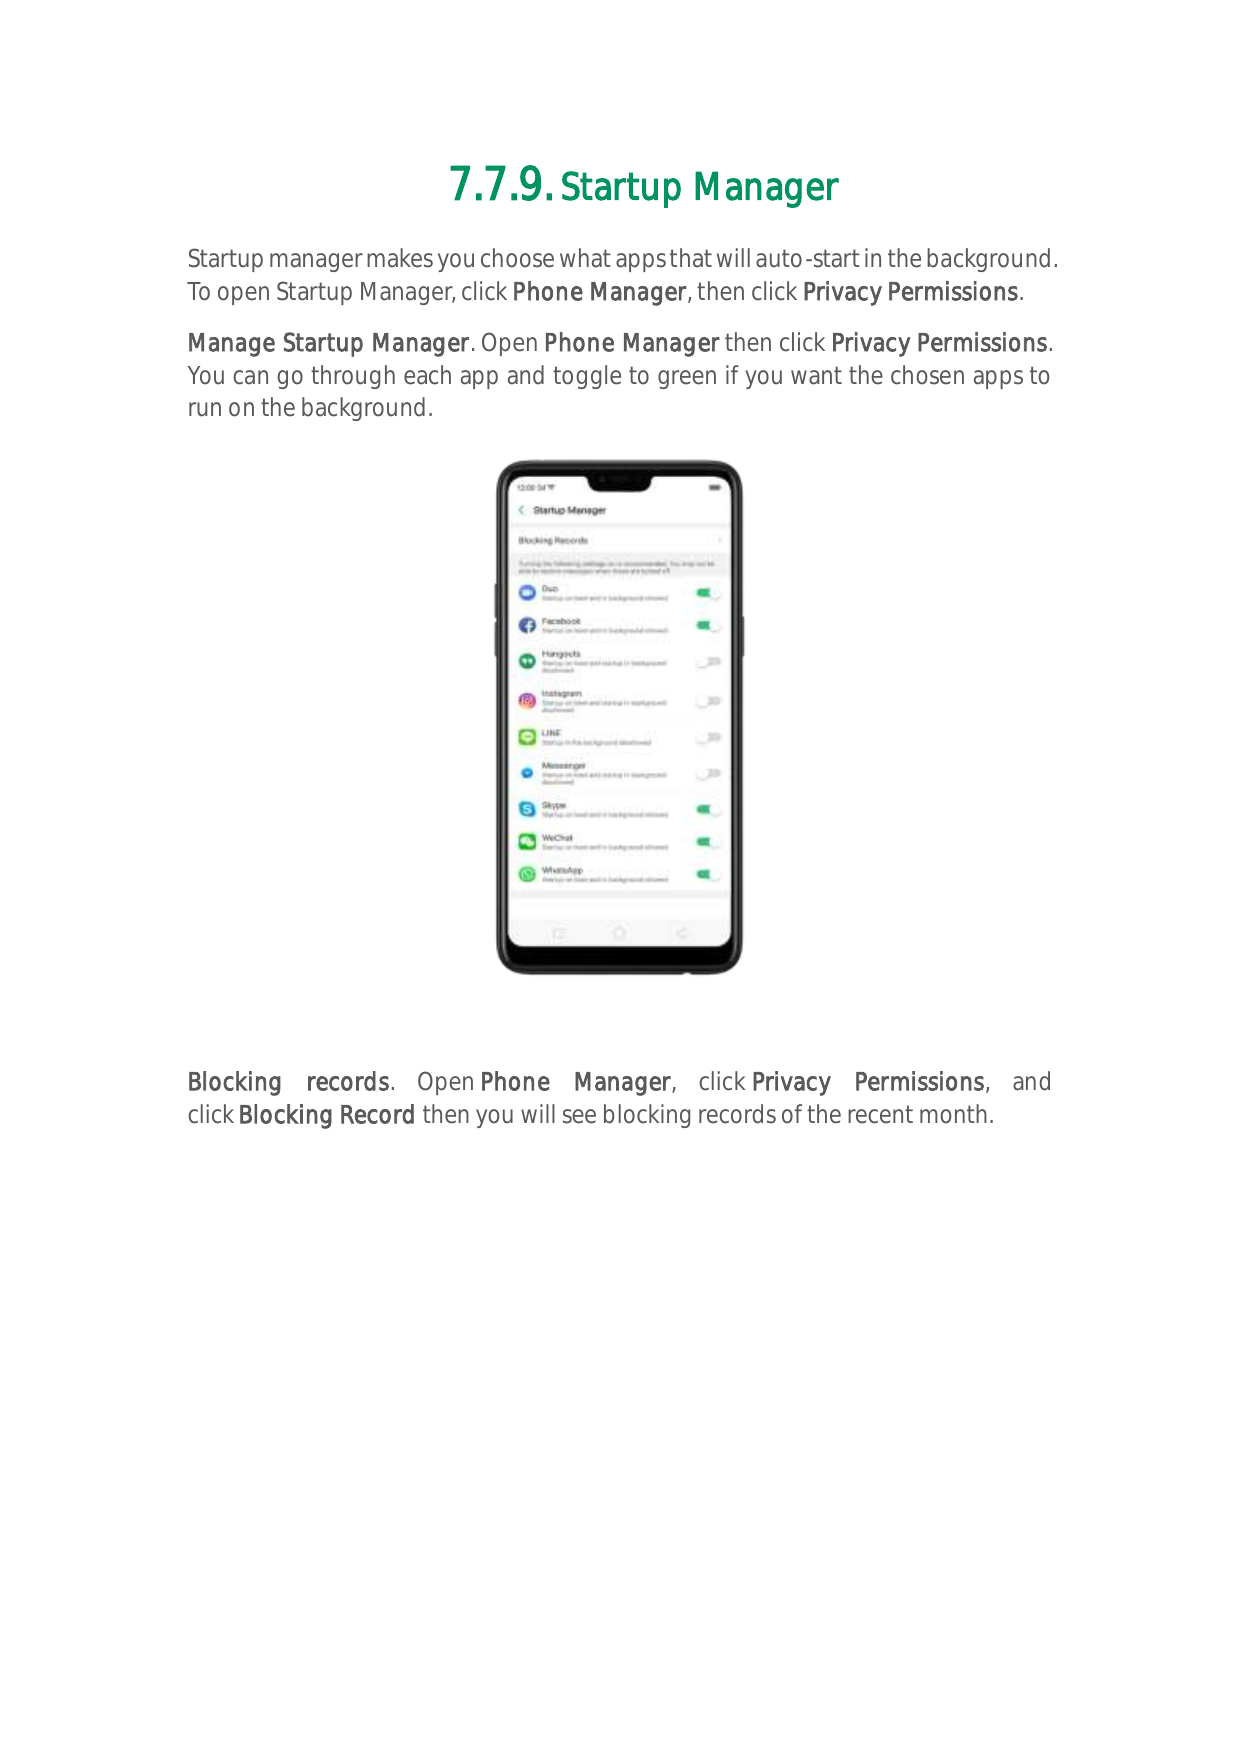 7.7.9. Startup ManagerStartup manager makes you choose what apps that will auto-start in the background.To open Startup Manager,